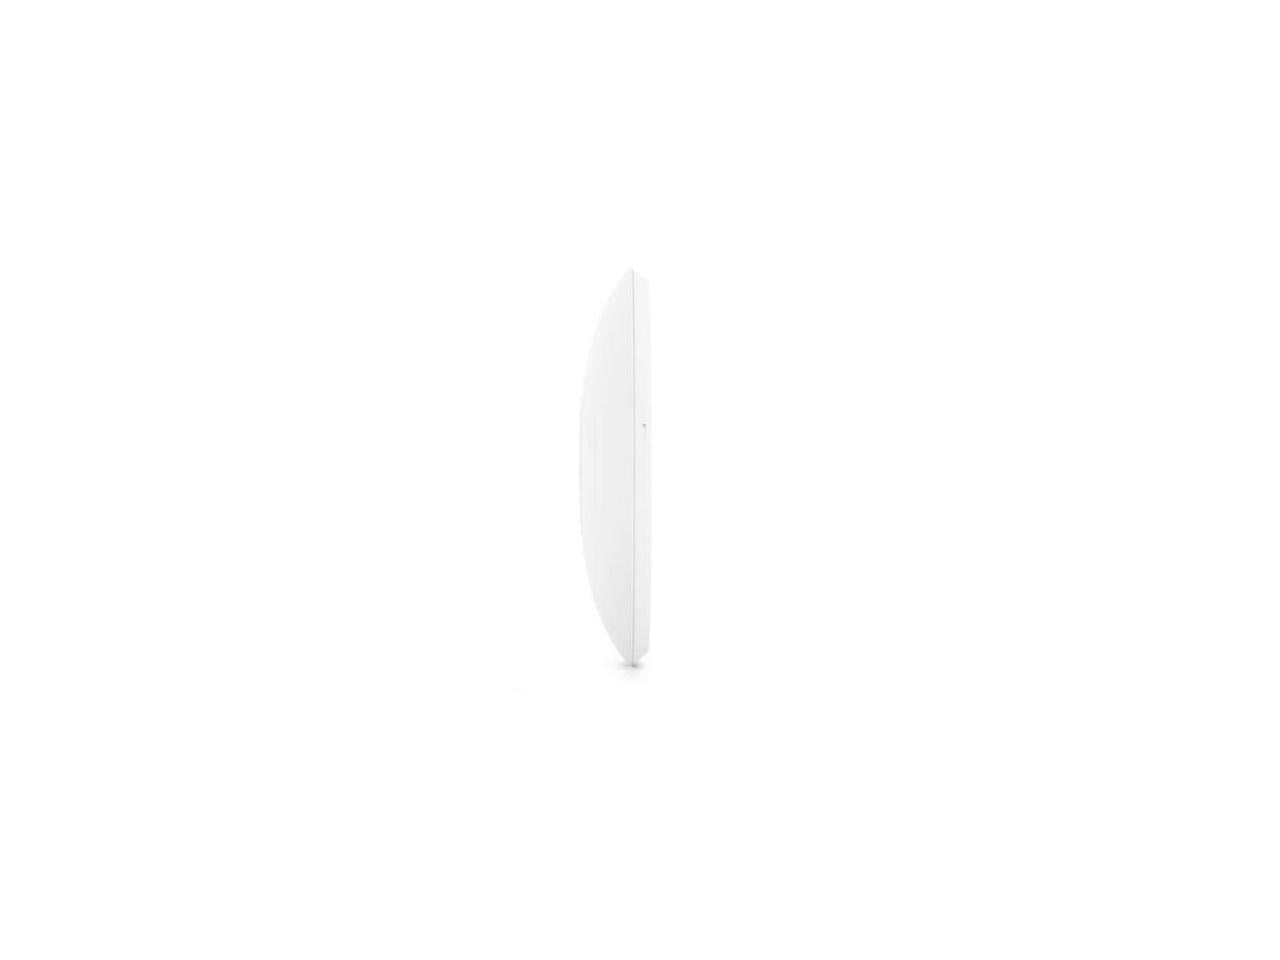 | | 300 Throughput Up 573.5 Steel SGCC Gen Point WiFi Indoor Band | to Band 2.4 Band Mbps 6 Rate Plastic, Professional Pro WiFi White Client Access | Gbps, U6 Ubiquiti 4.8 | 5GHz GHz | Dual UniFi